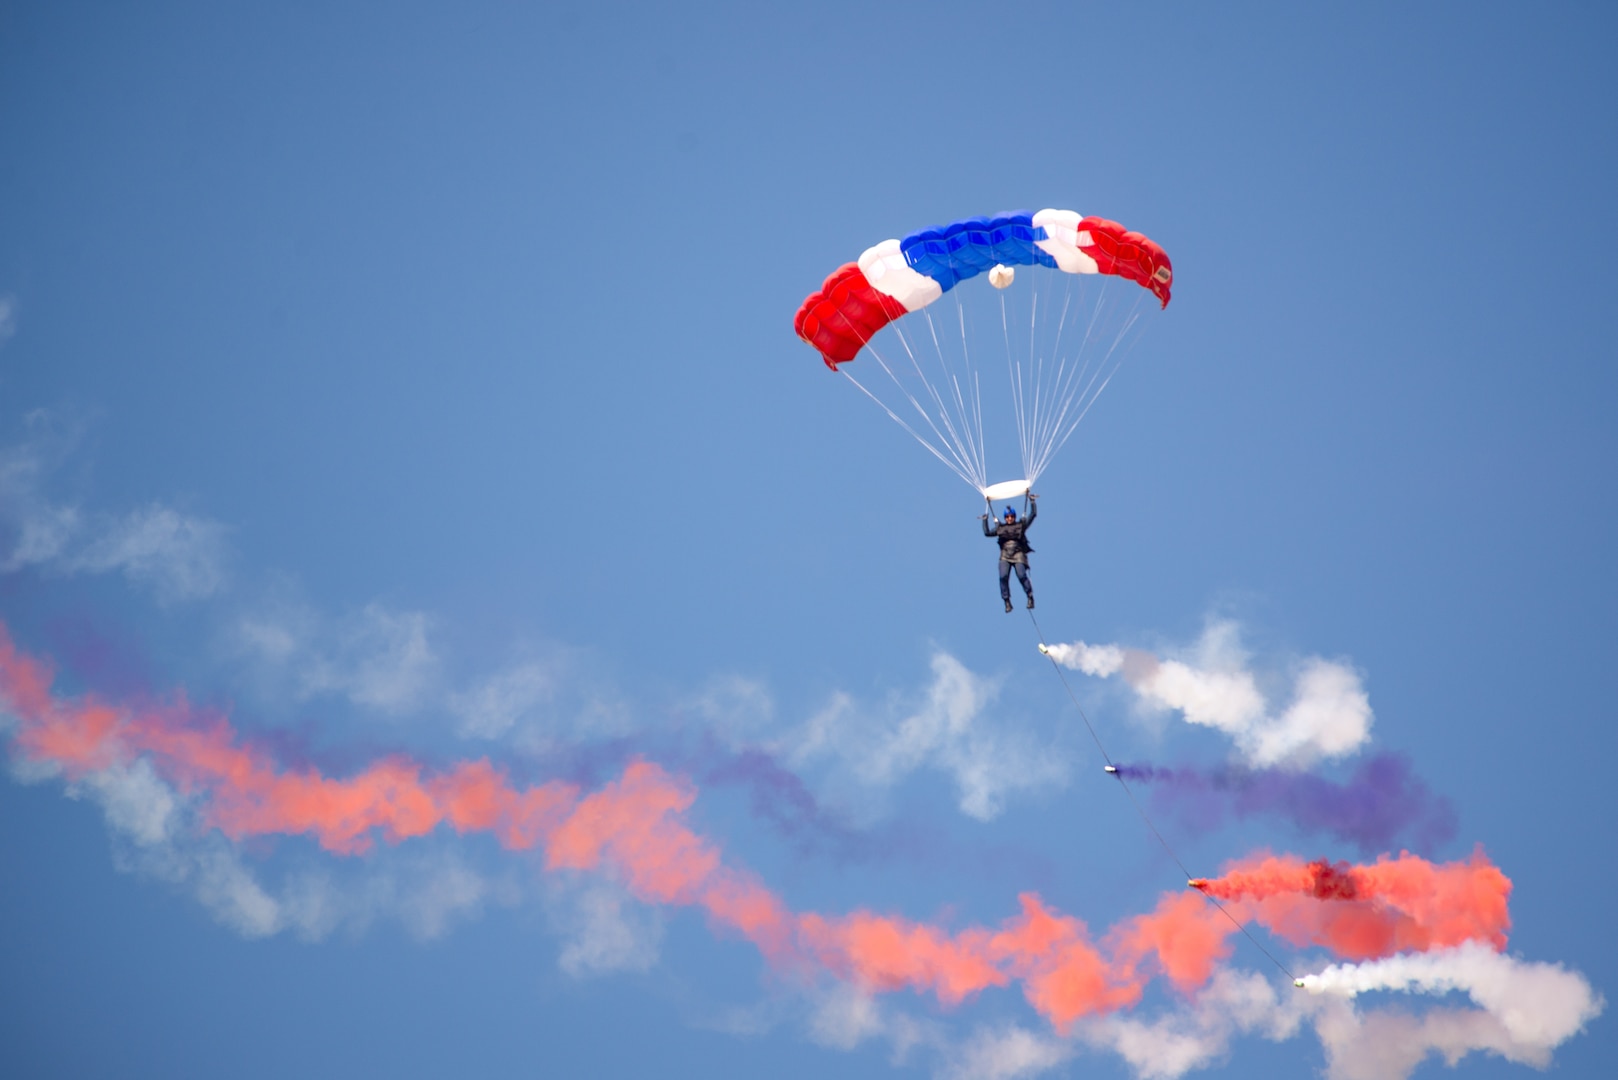 The U.S. Air Force Academy Wings of Blue Parachute Team performs jumps during Chile’s Feria Internacional del Aire y Espacio (FIDAE) April 5, 2022, in Santiago, Chile.